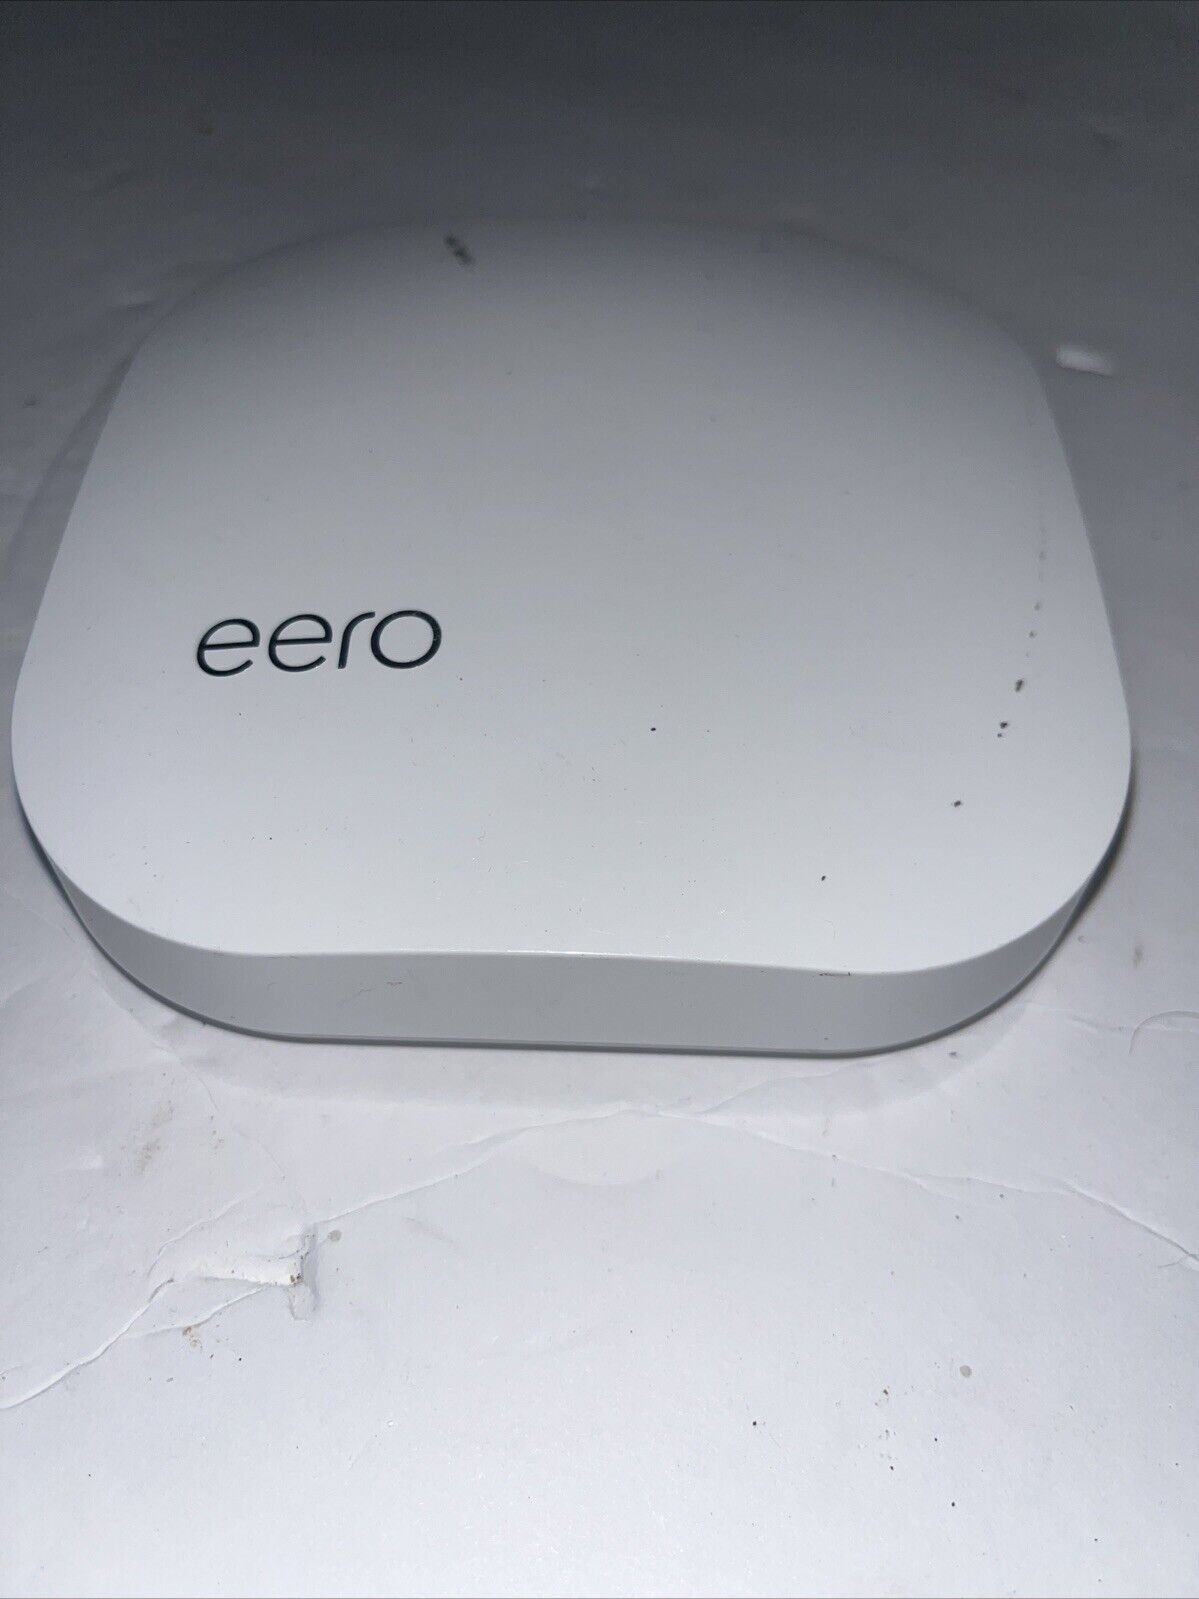 Eero Pro B010001 2nd Generation AC Tri-Band Mesh Router - White No Cord